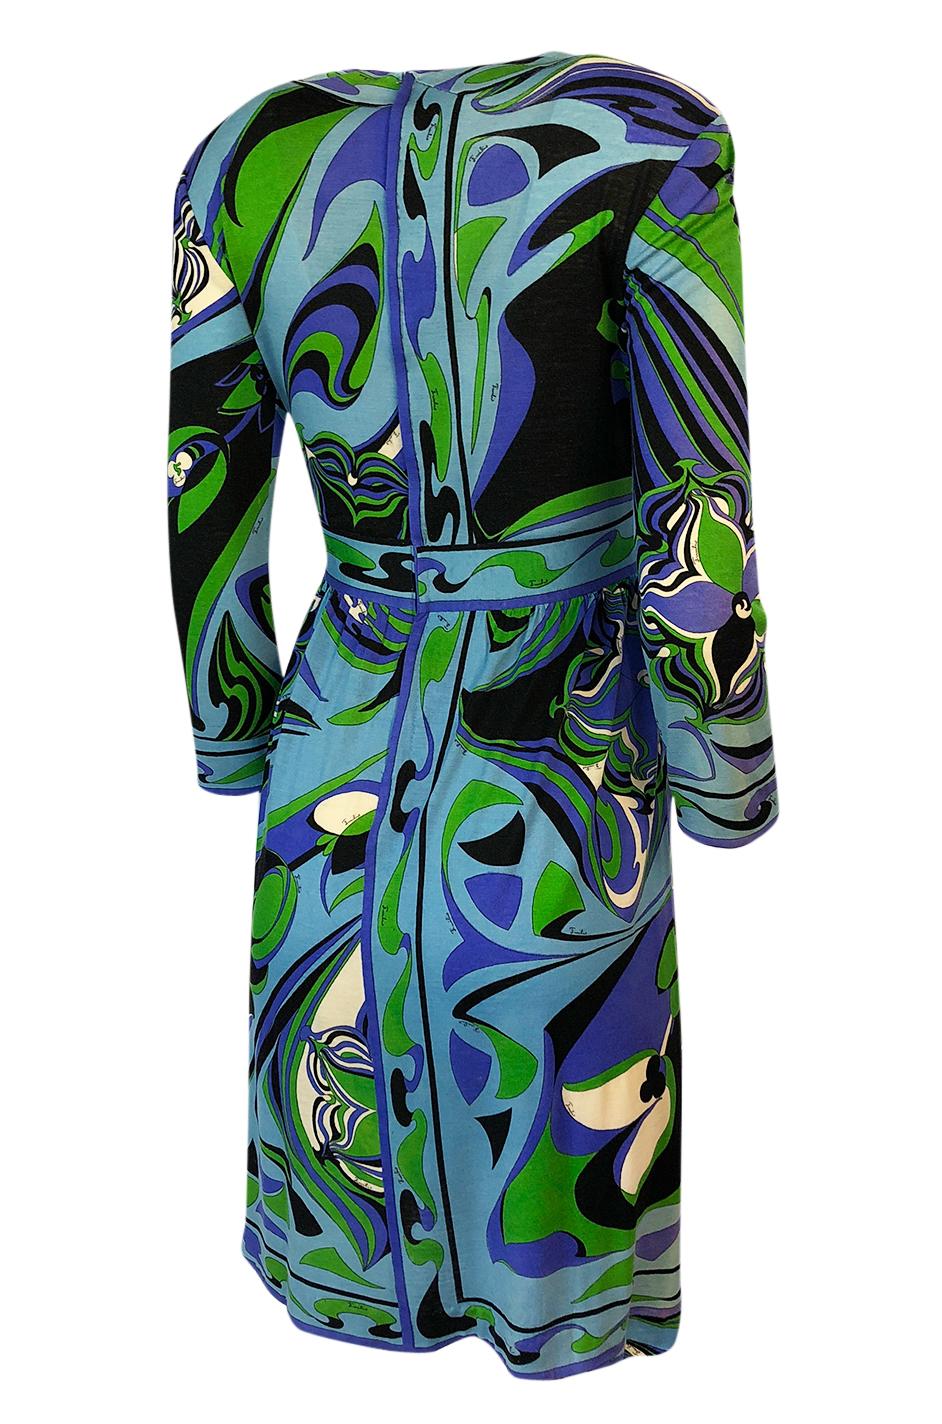 This beautiful Emilio Pucci dress is made out of a luxurious mix of cashmere, silk and wool. This mix makes for an incredibly fine, soft fabrication that holds the color exceptionally well and feels wonderful on the body. Covering every square inch